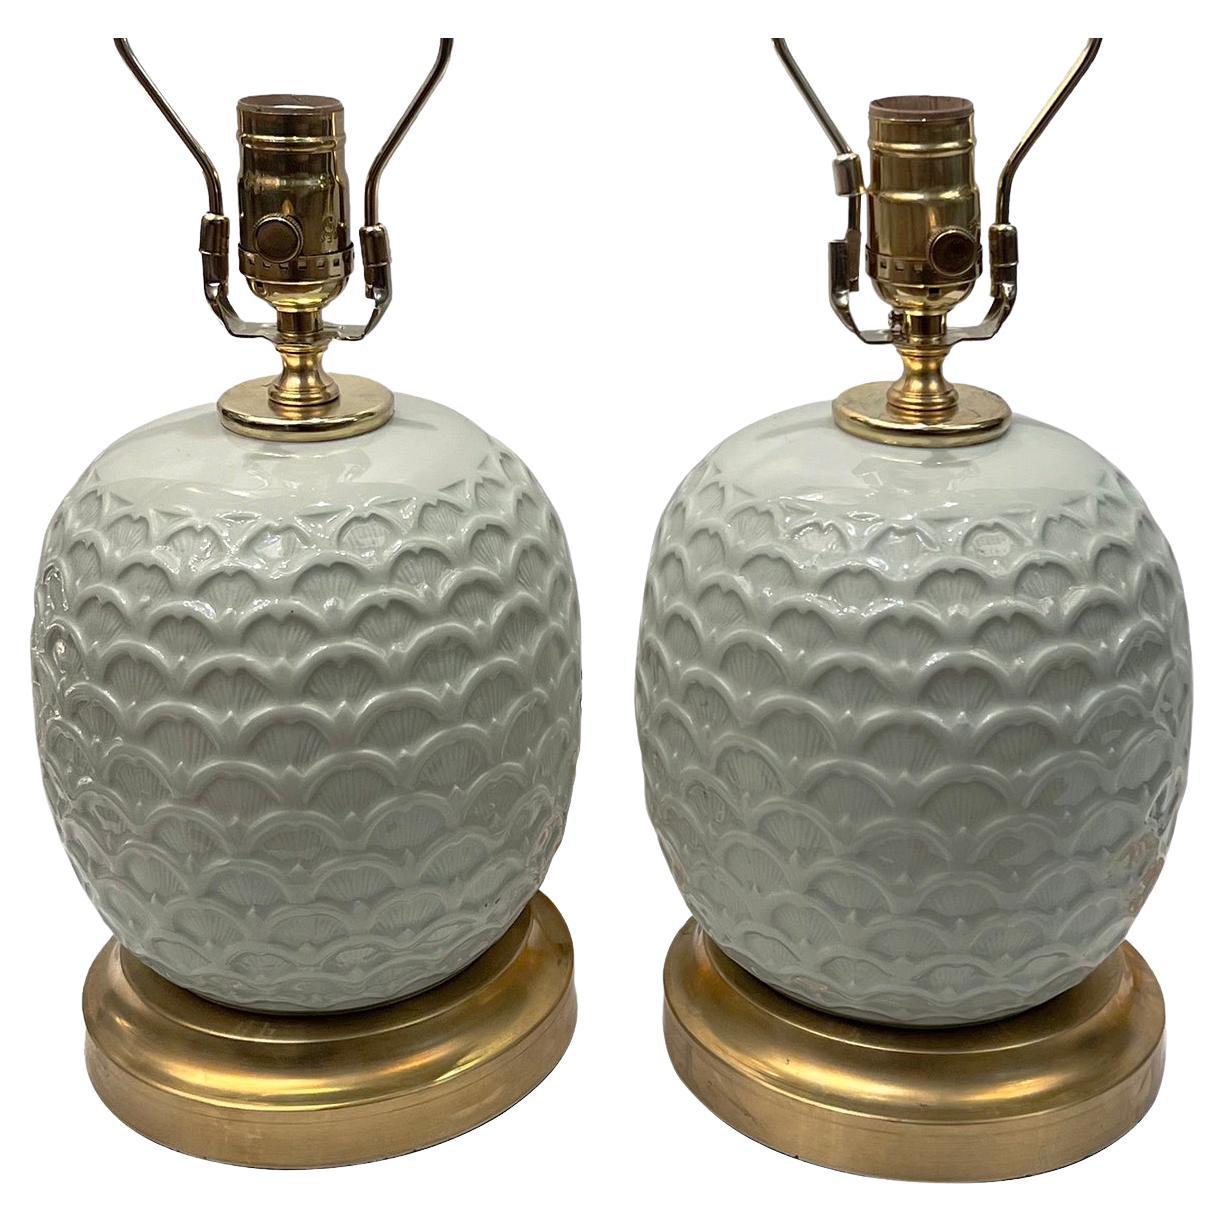 Pair of circa 1920s French celadon table lamps.

Measurements:
Height of body: 9.75?
Height to shade rest:17.75?
Diameter: 6.5?.